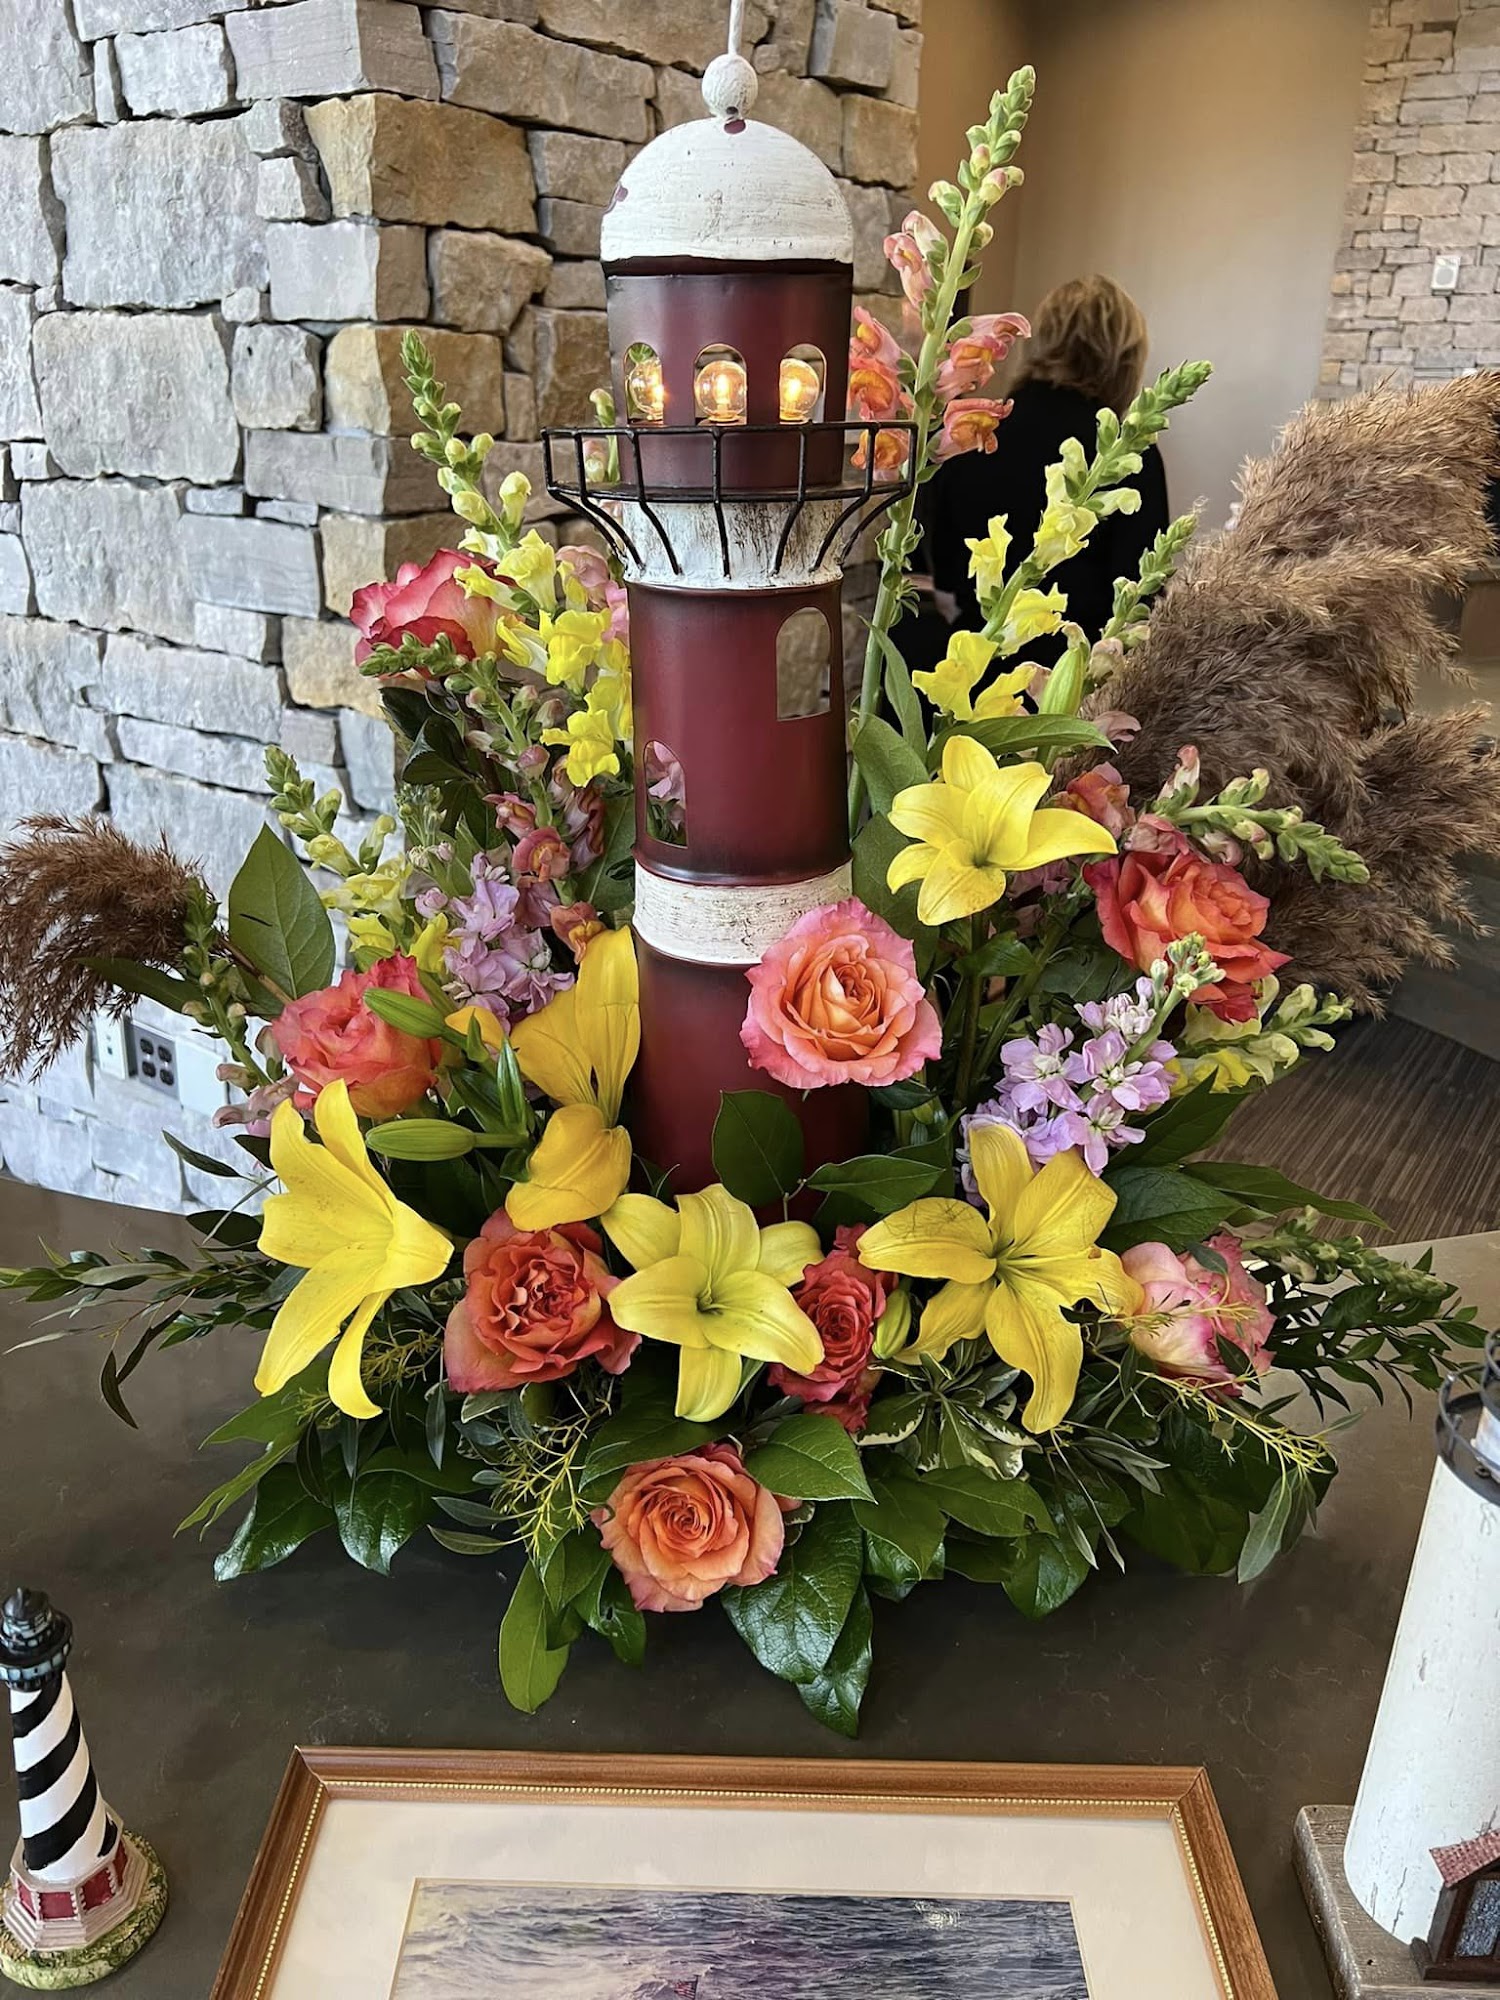 Jerry's Flowers & Gifts